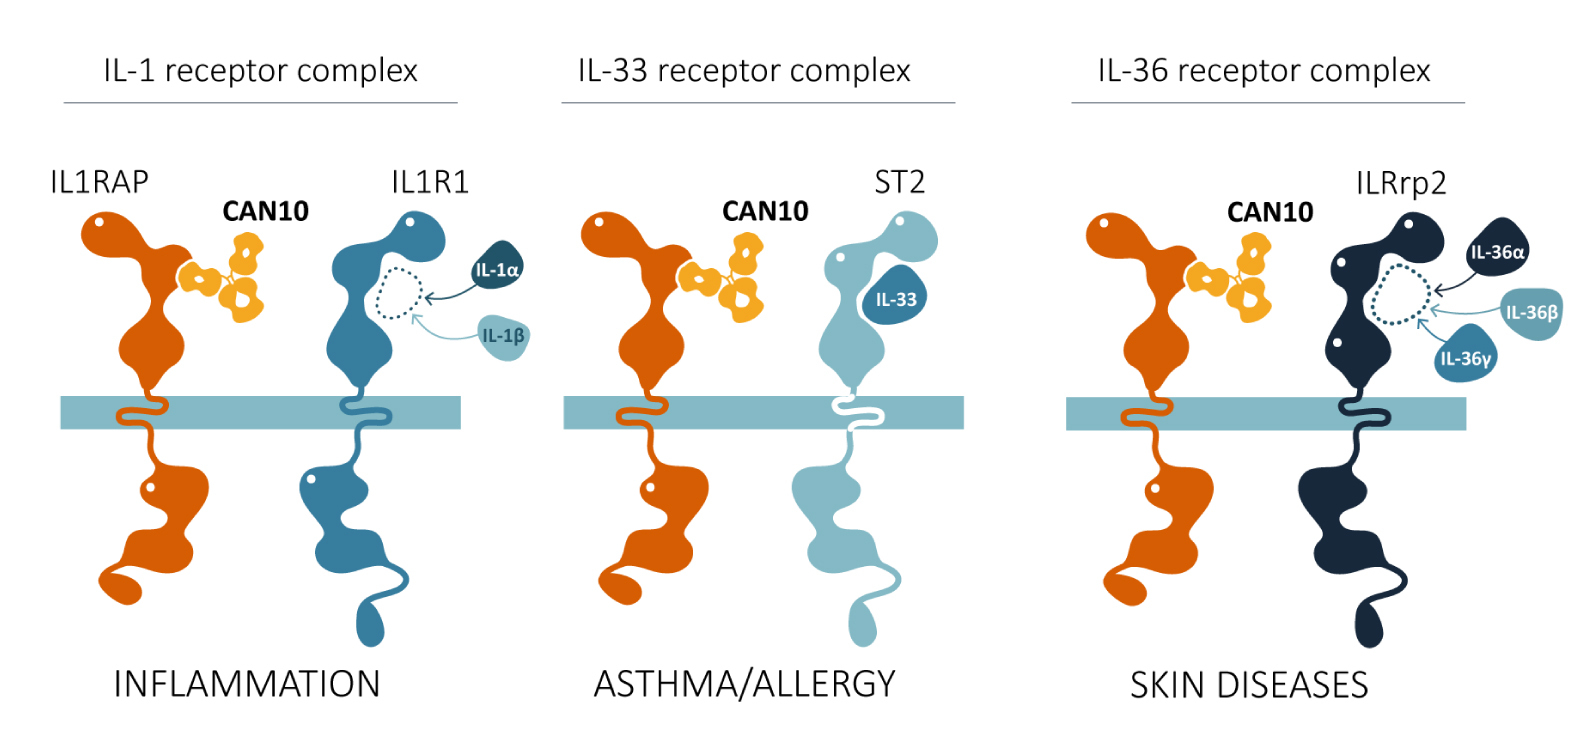 In the CAN10 project, Cantargia is developing an antibody that blocks IL-1, IL-33 and IL-36 for treatment of the life-threatening diseases myocarditis and systemic sclerosis.